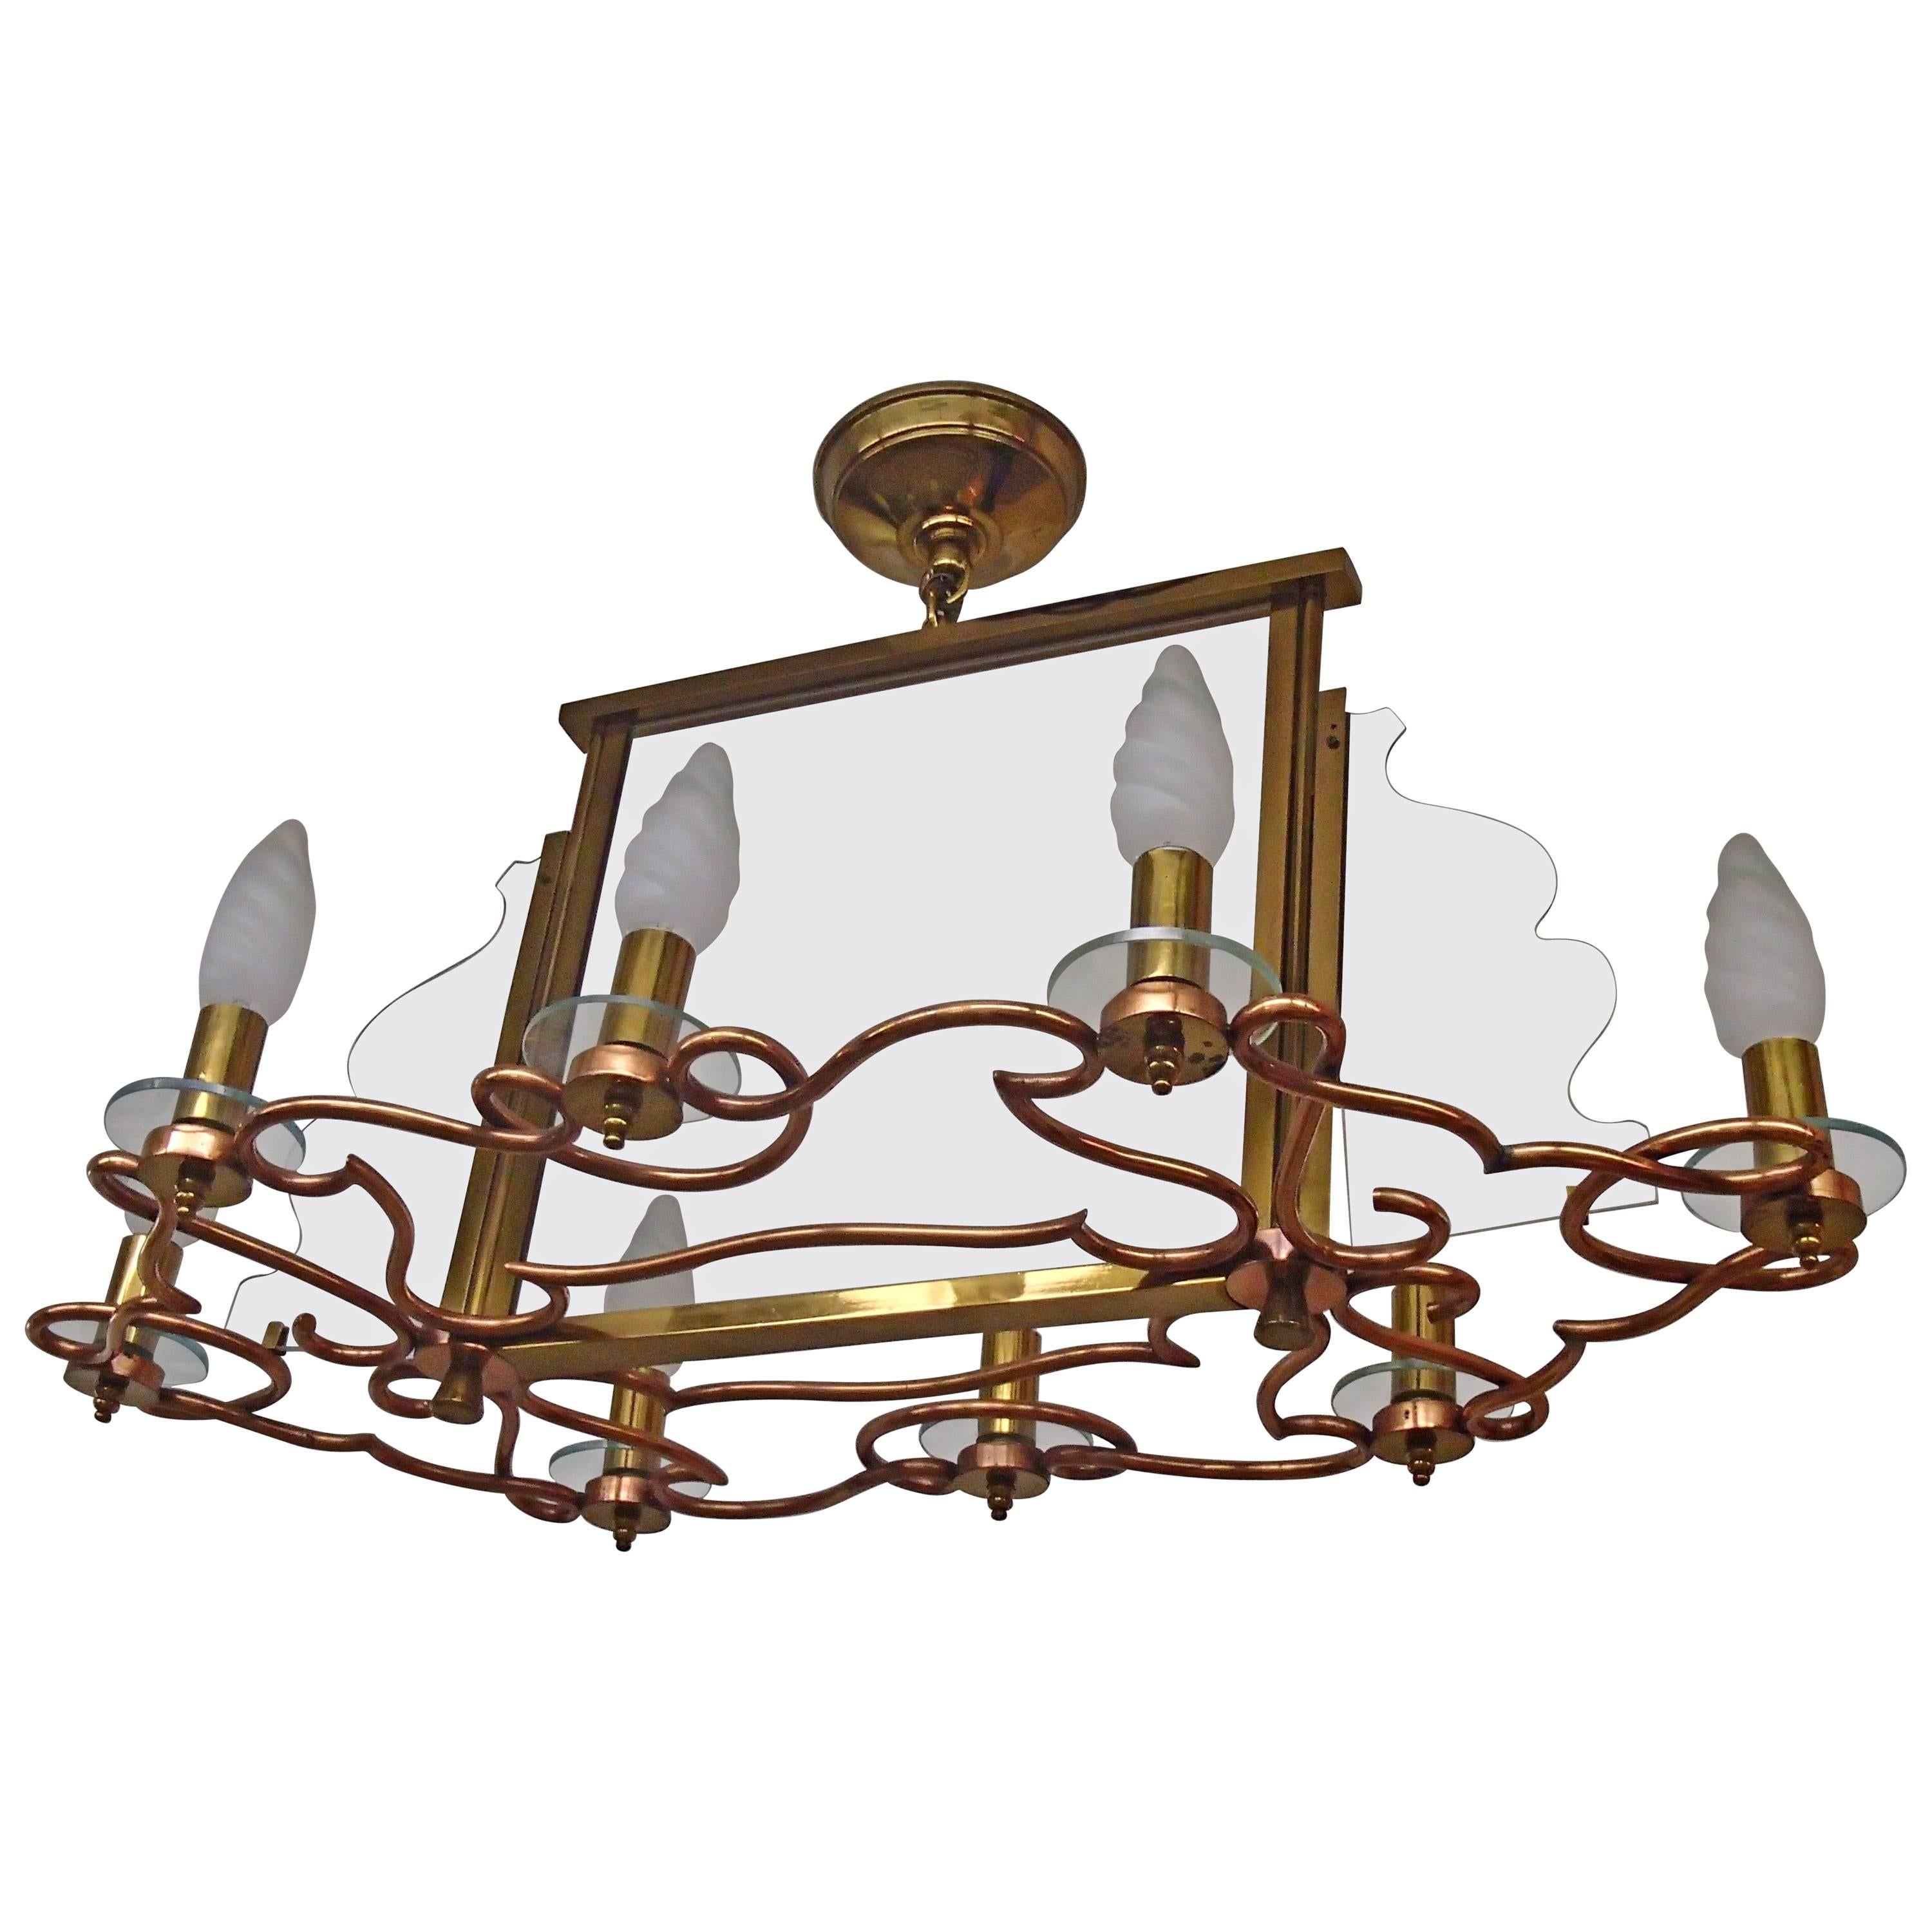 1940 Huge Decorative Copper Brass and Graved Glass Chandelier For Sale